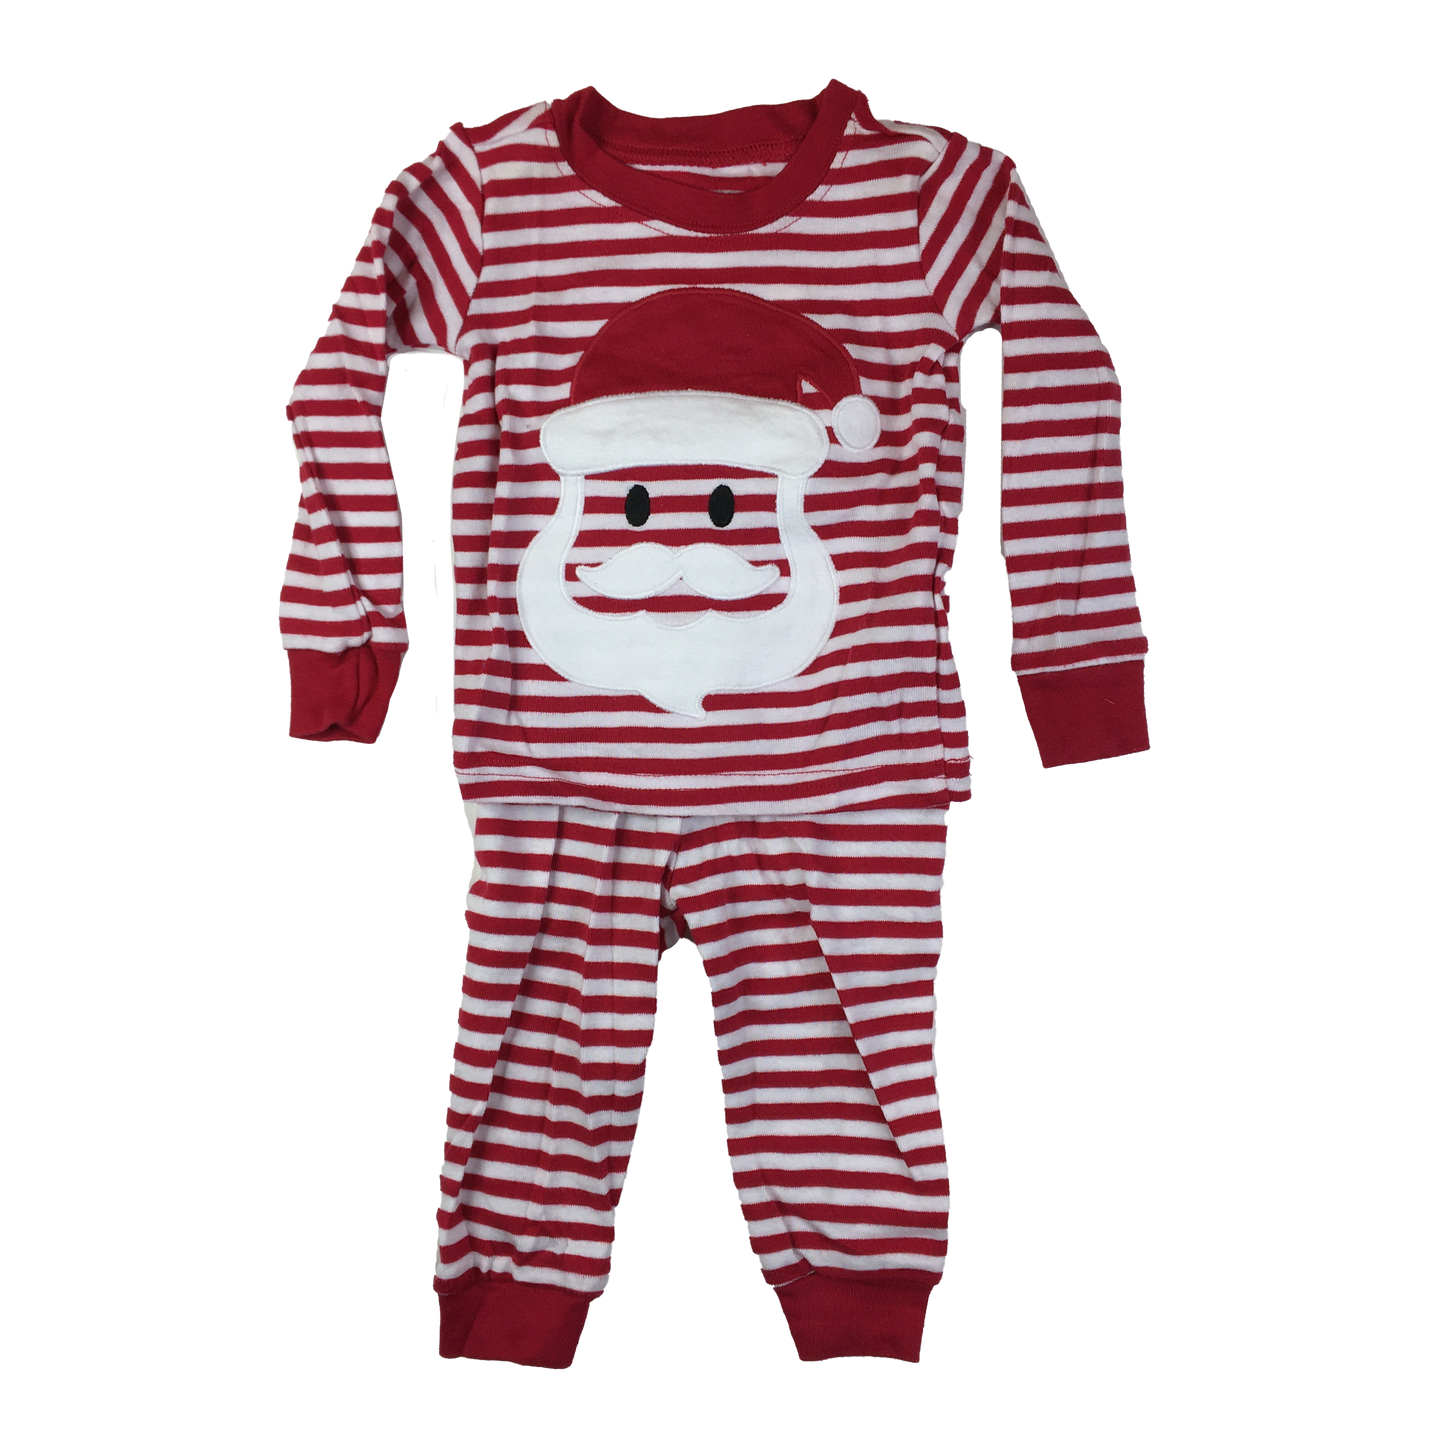 Children's Place Red & White Striped Sleepers 3-6M